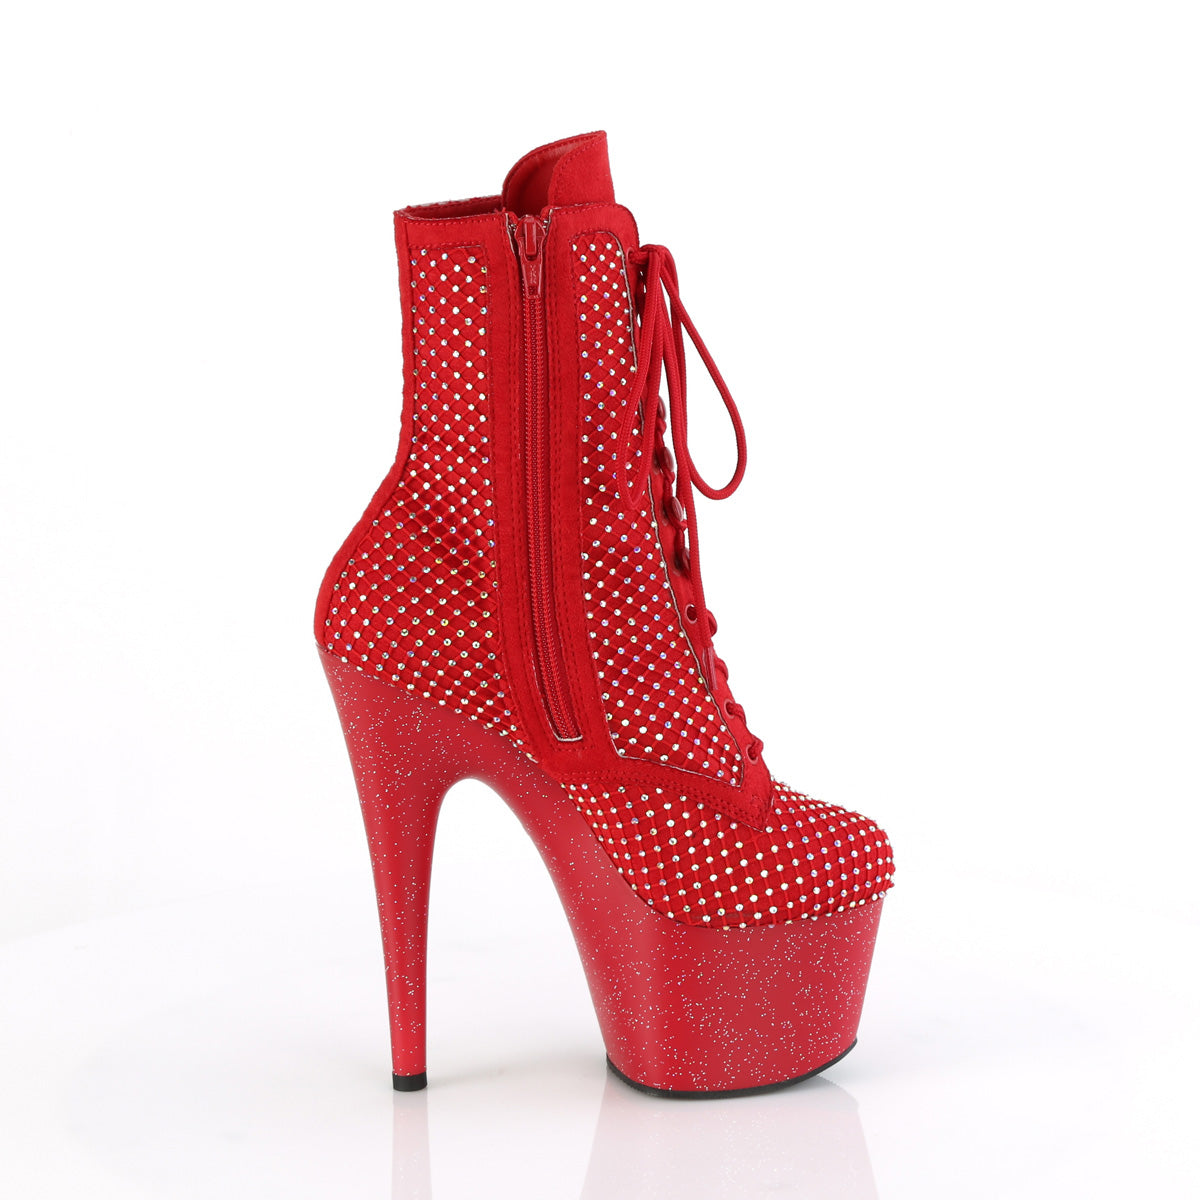 red pole boots adore-1020rm